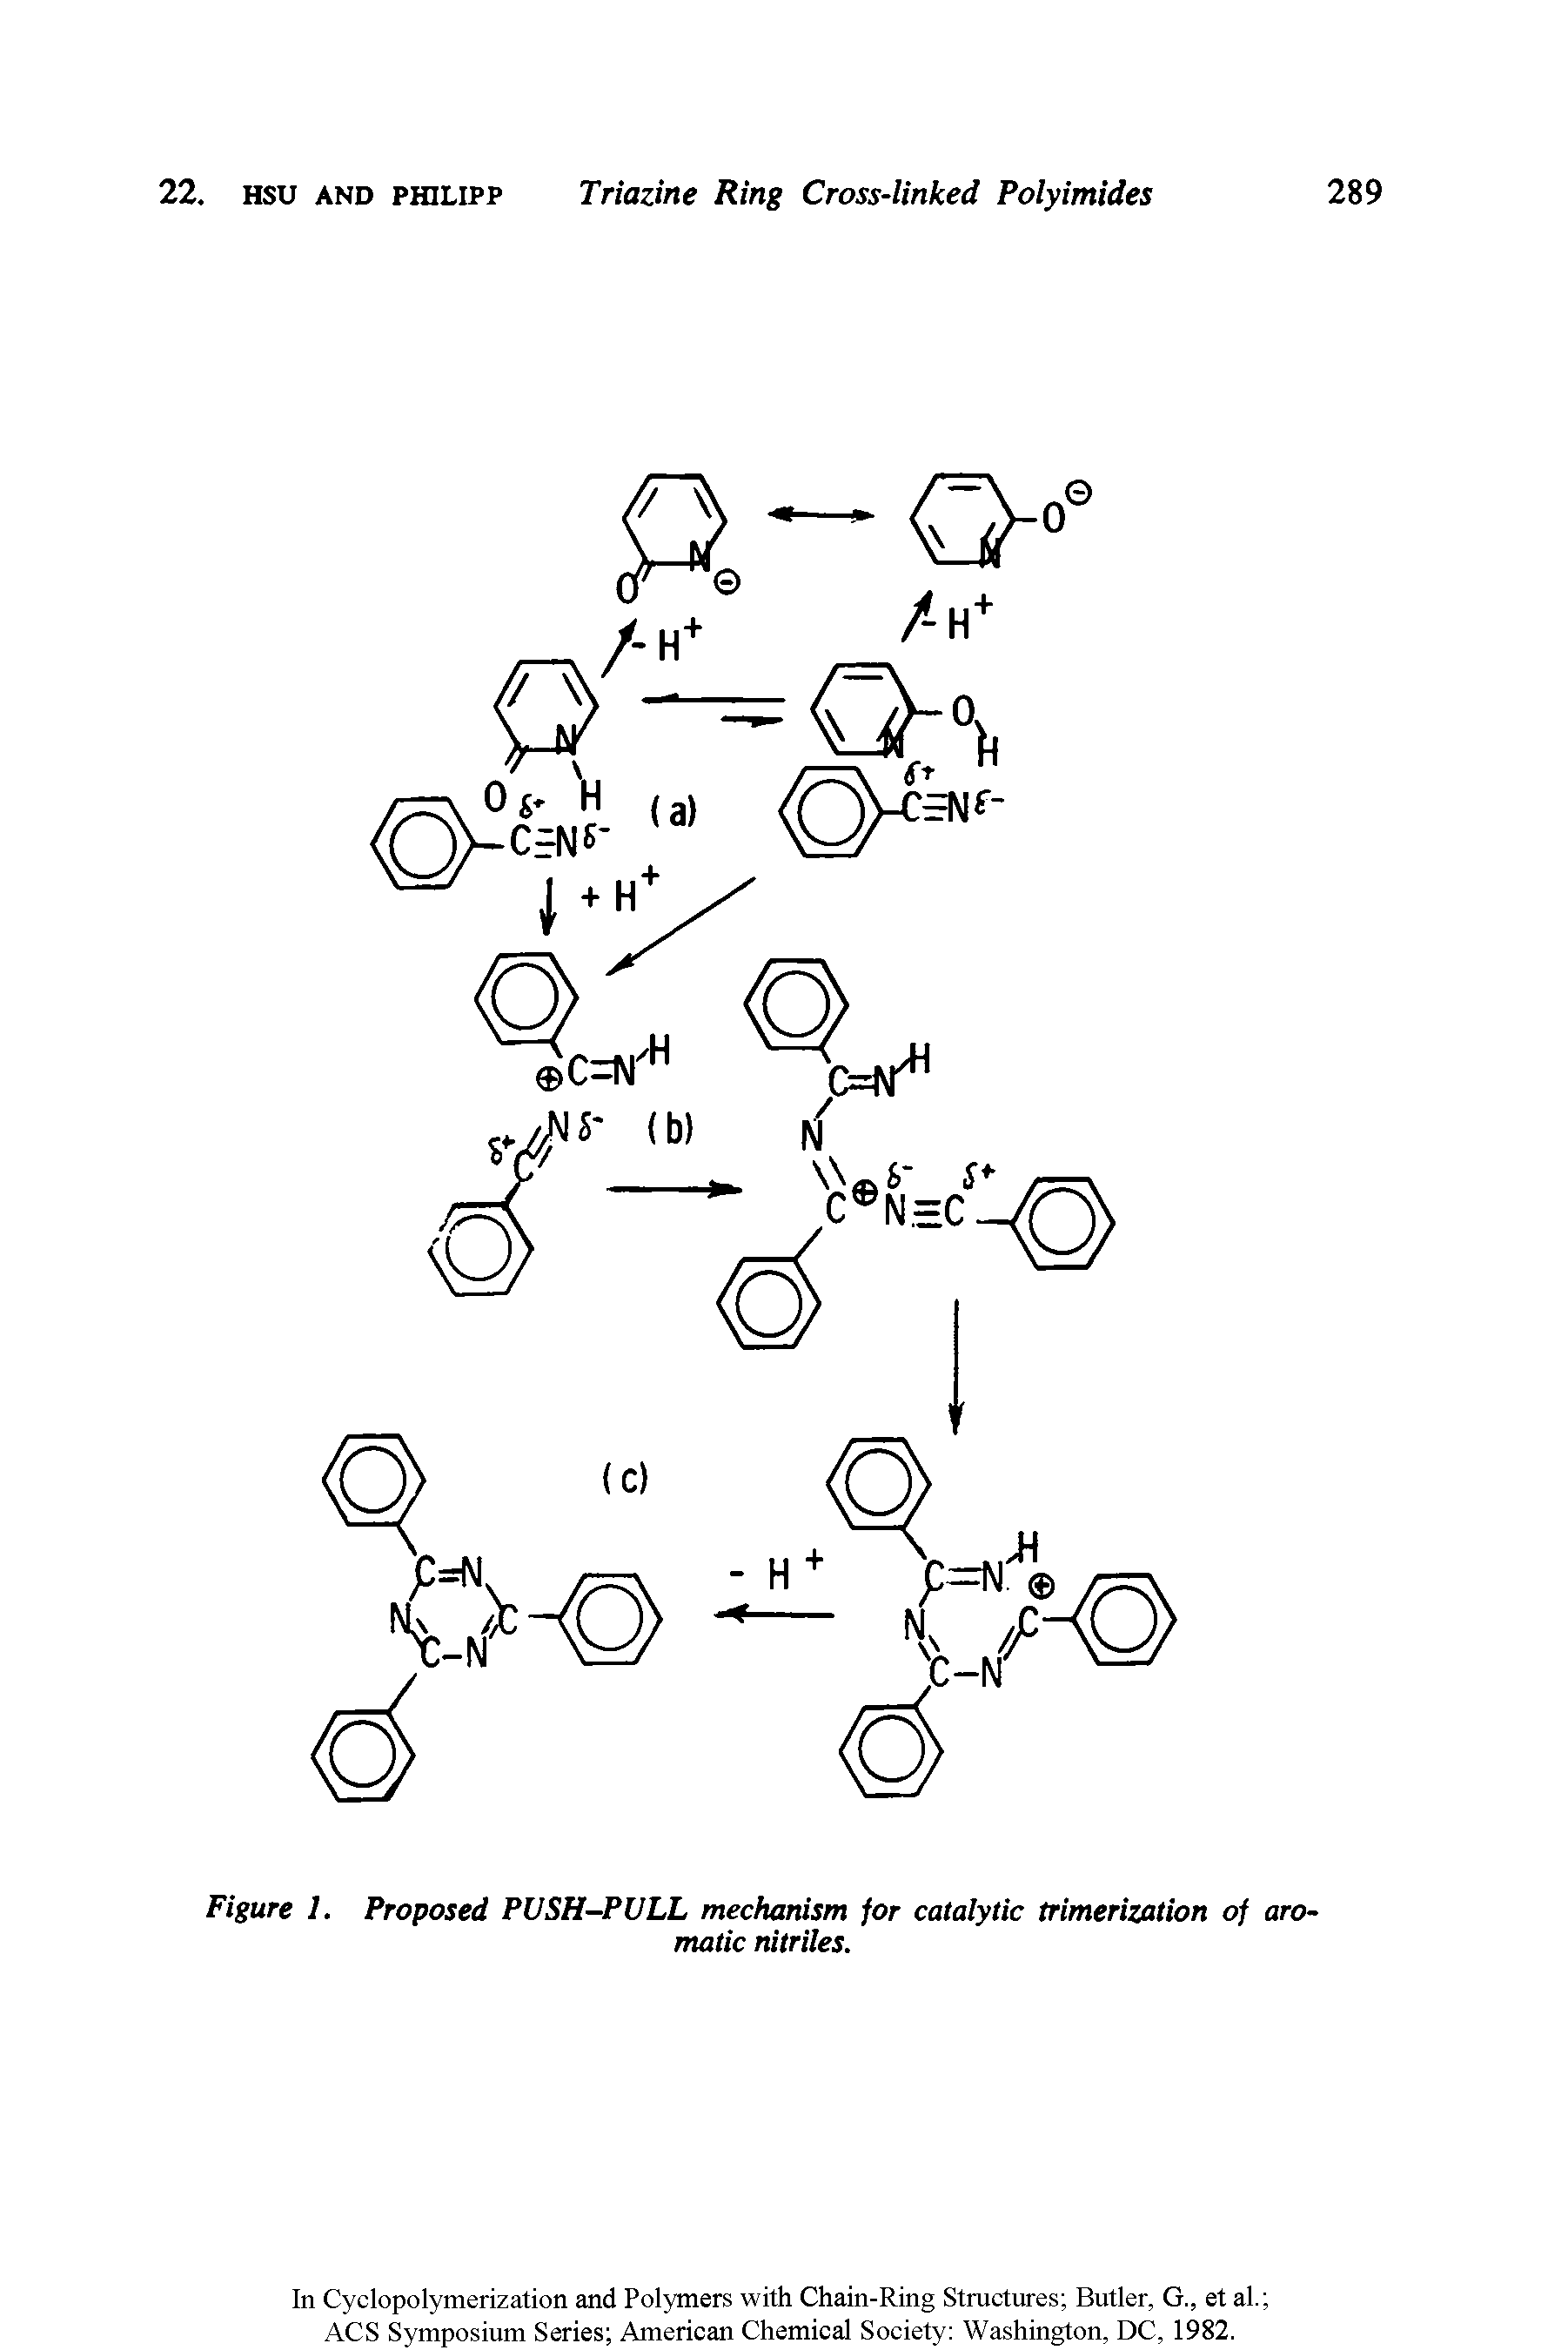 Figure 1. Proposed PUSH-PULL mechanism for catalytic trimerization of aromatic nitriles.